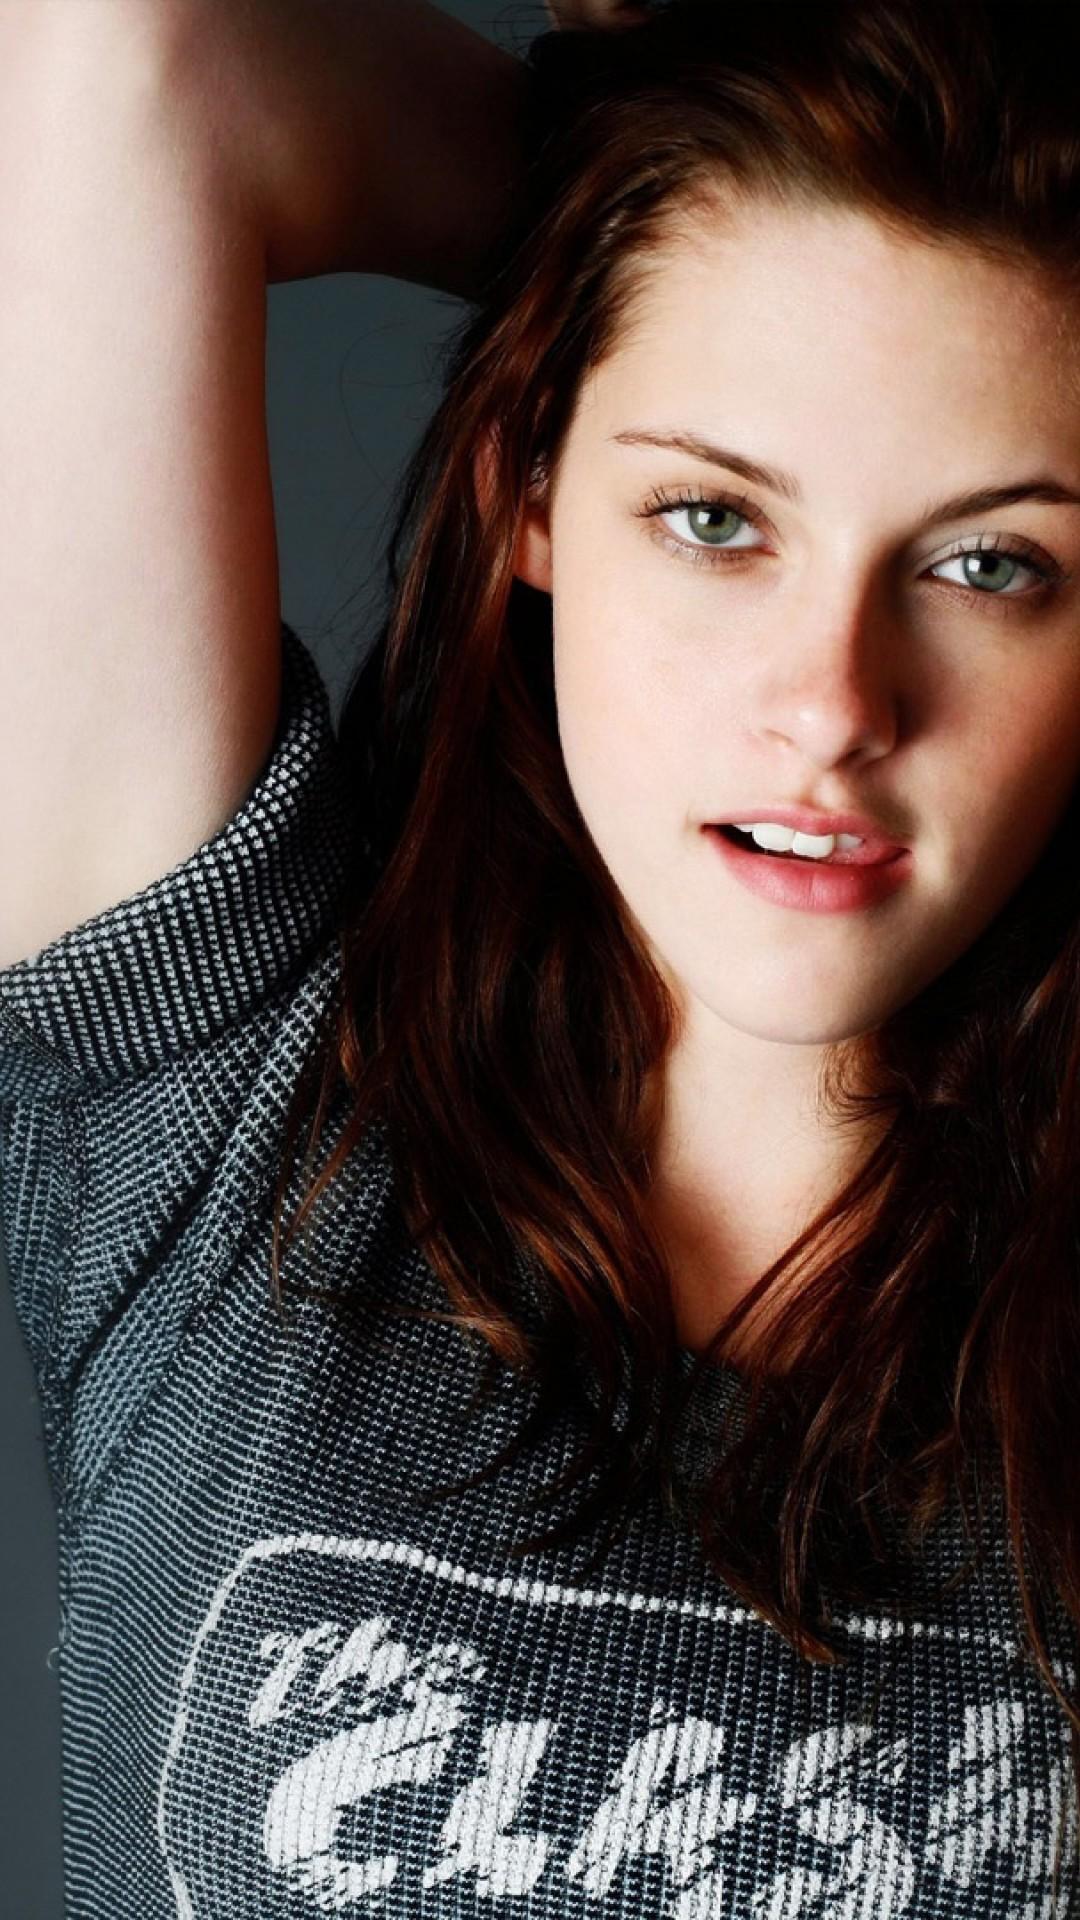 Free Download Kristen Stewart High Quality HD Wallpaper for Desktop and Mobiles iPhone 6 / 6S Plus